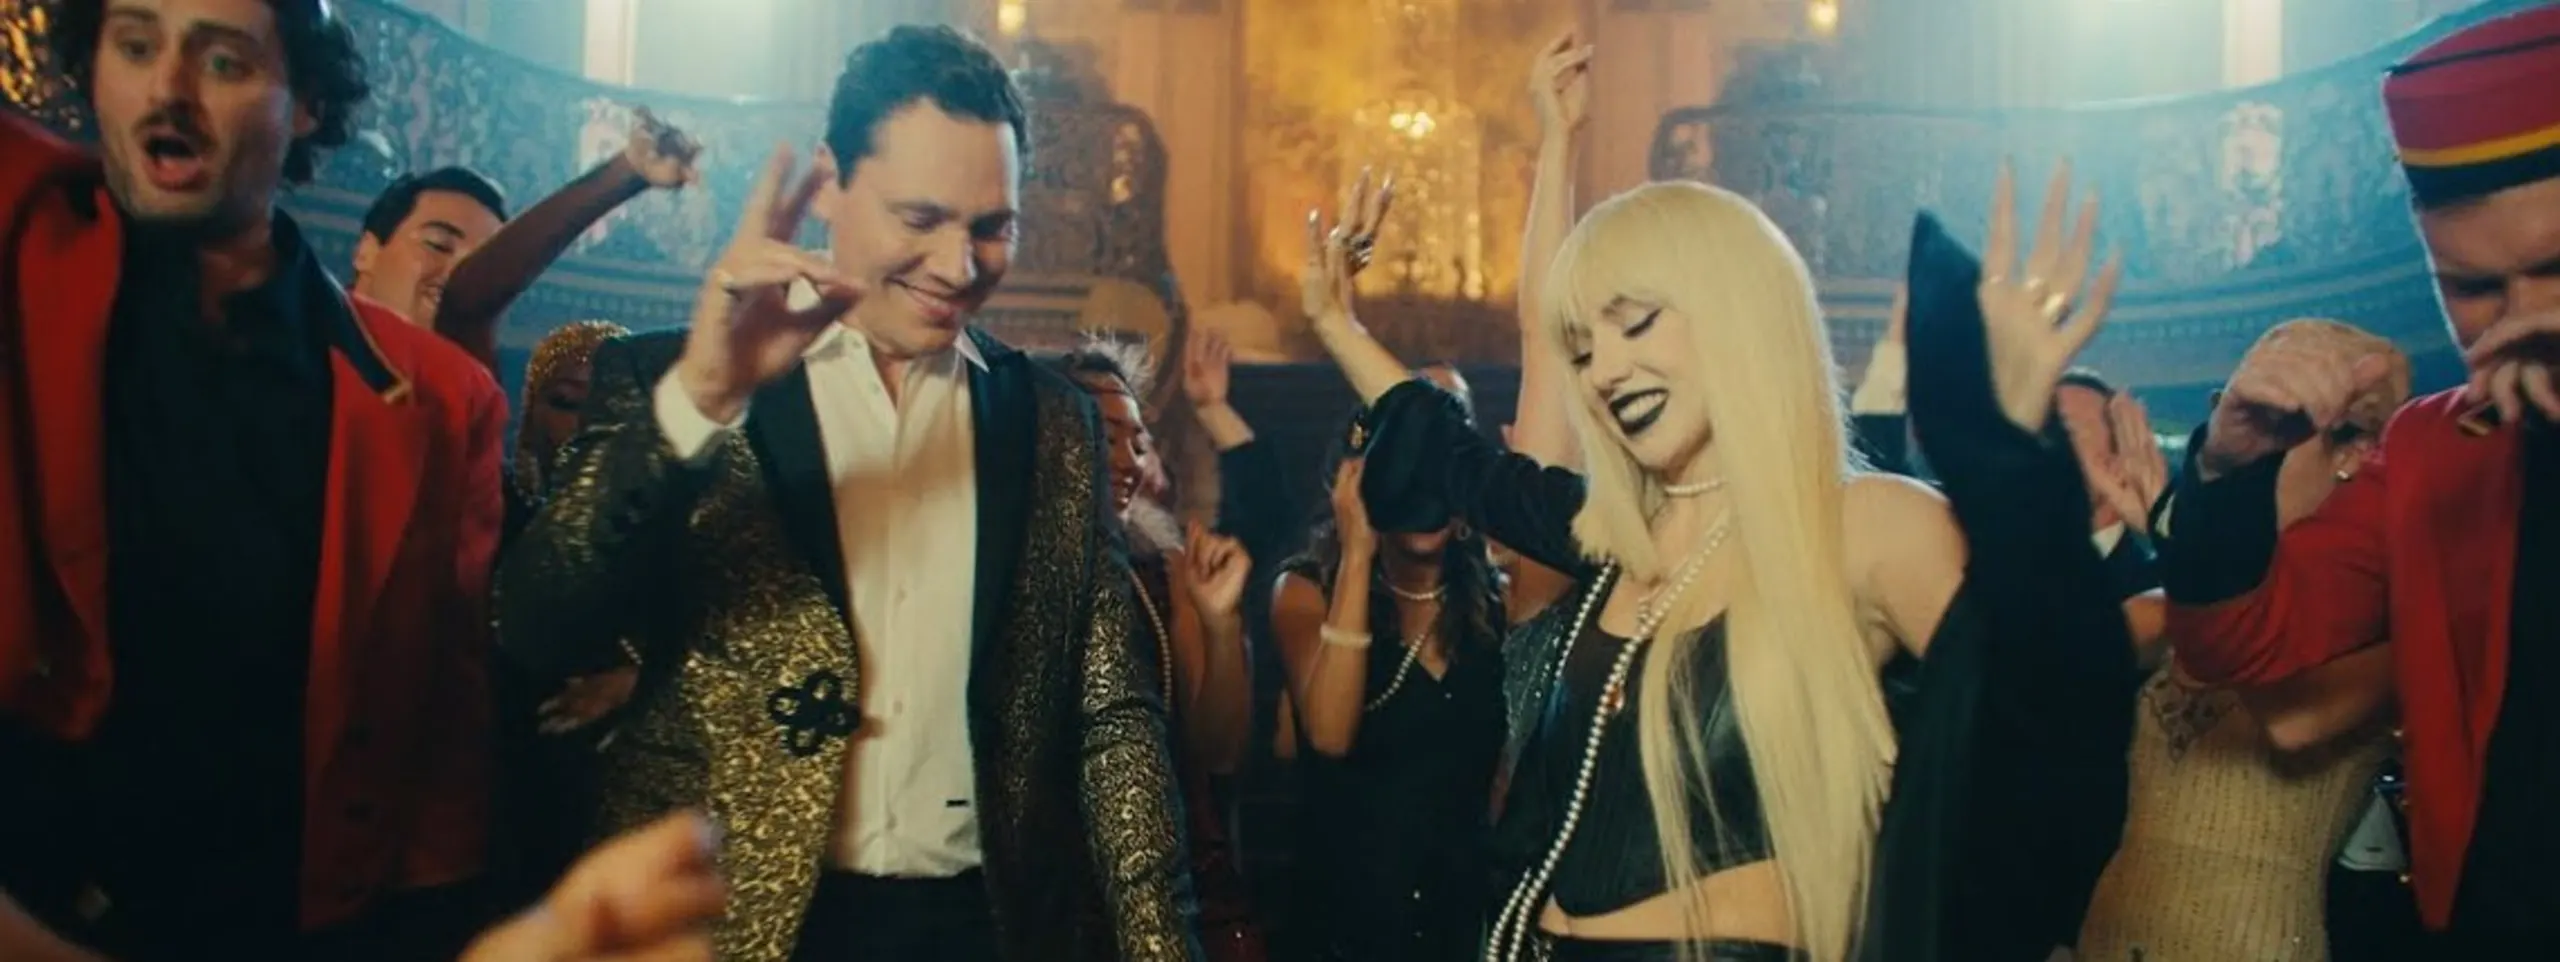 TIËSTO AND AVA MAX LAUNCH GLOBAL SEARCH FOR THE BEST REMIX OF "THE MOTTO"